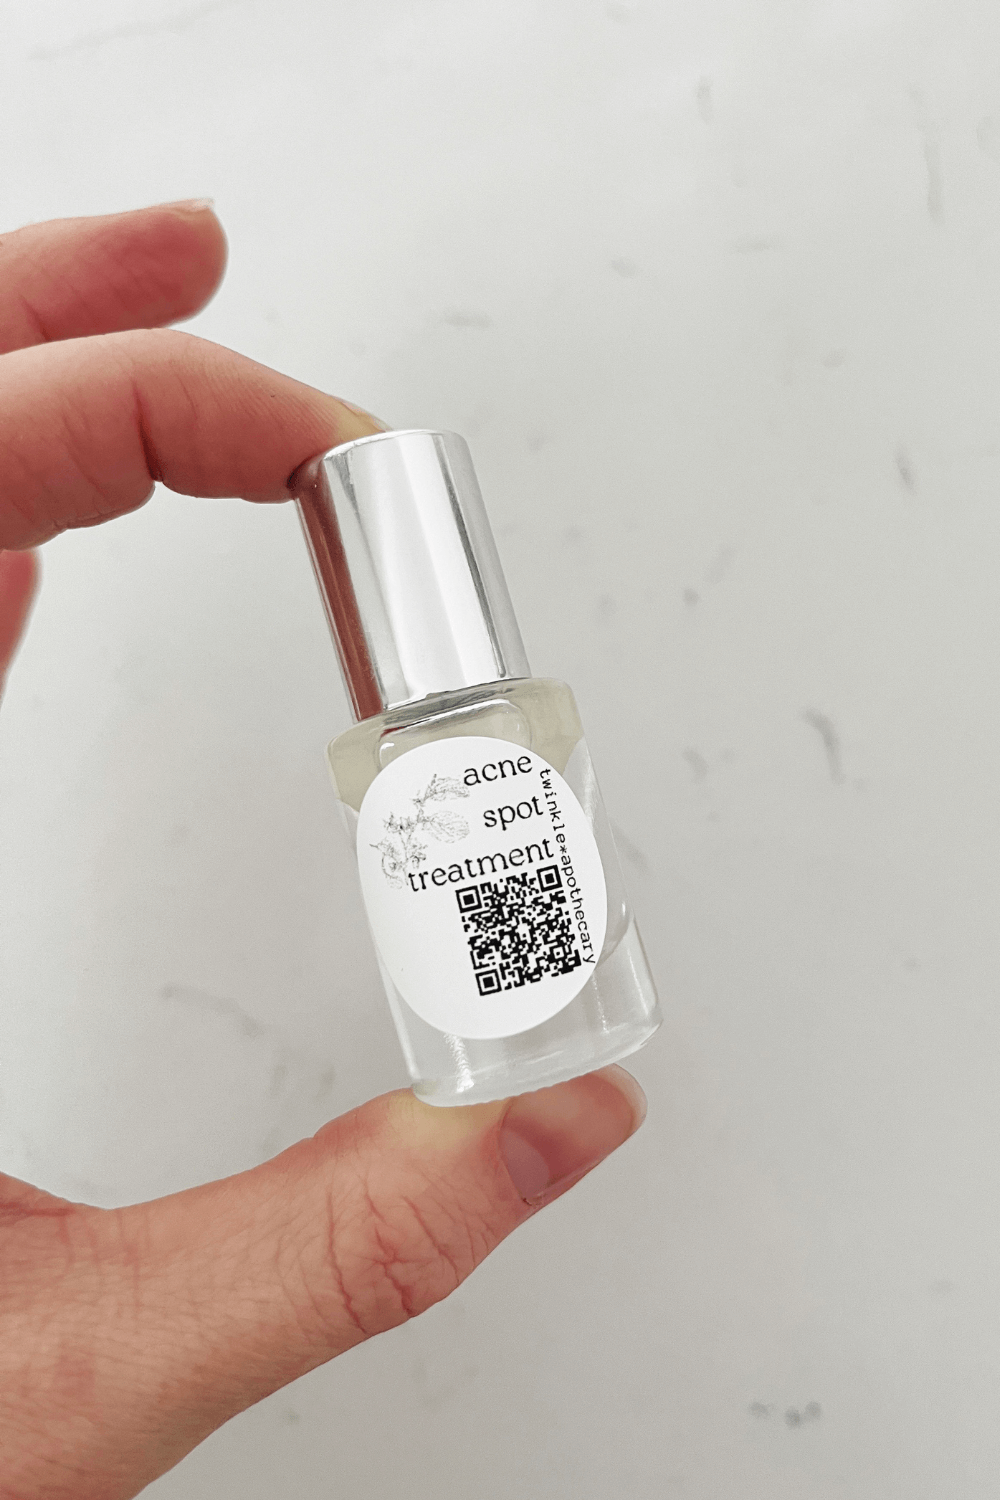 twinkle apothecary acne spot treatment